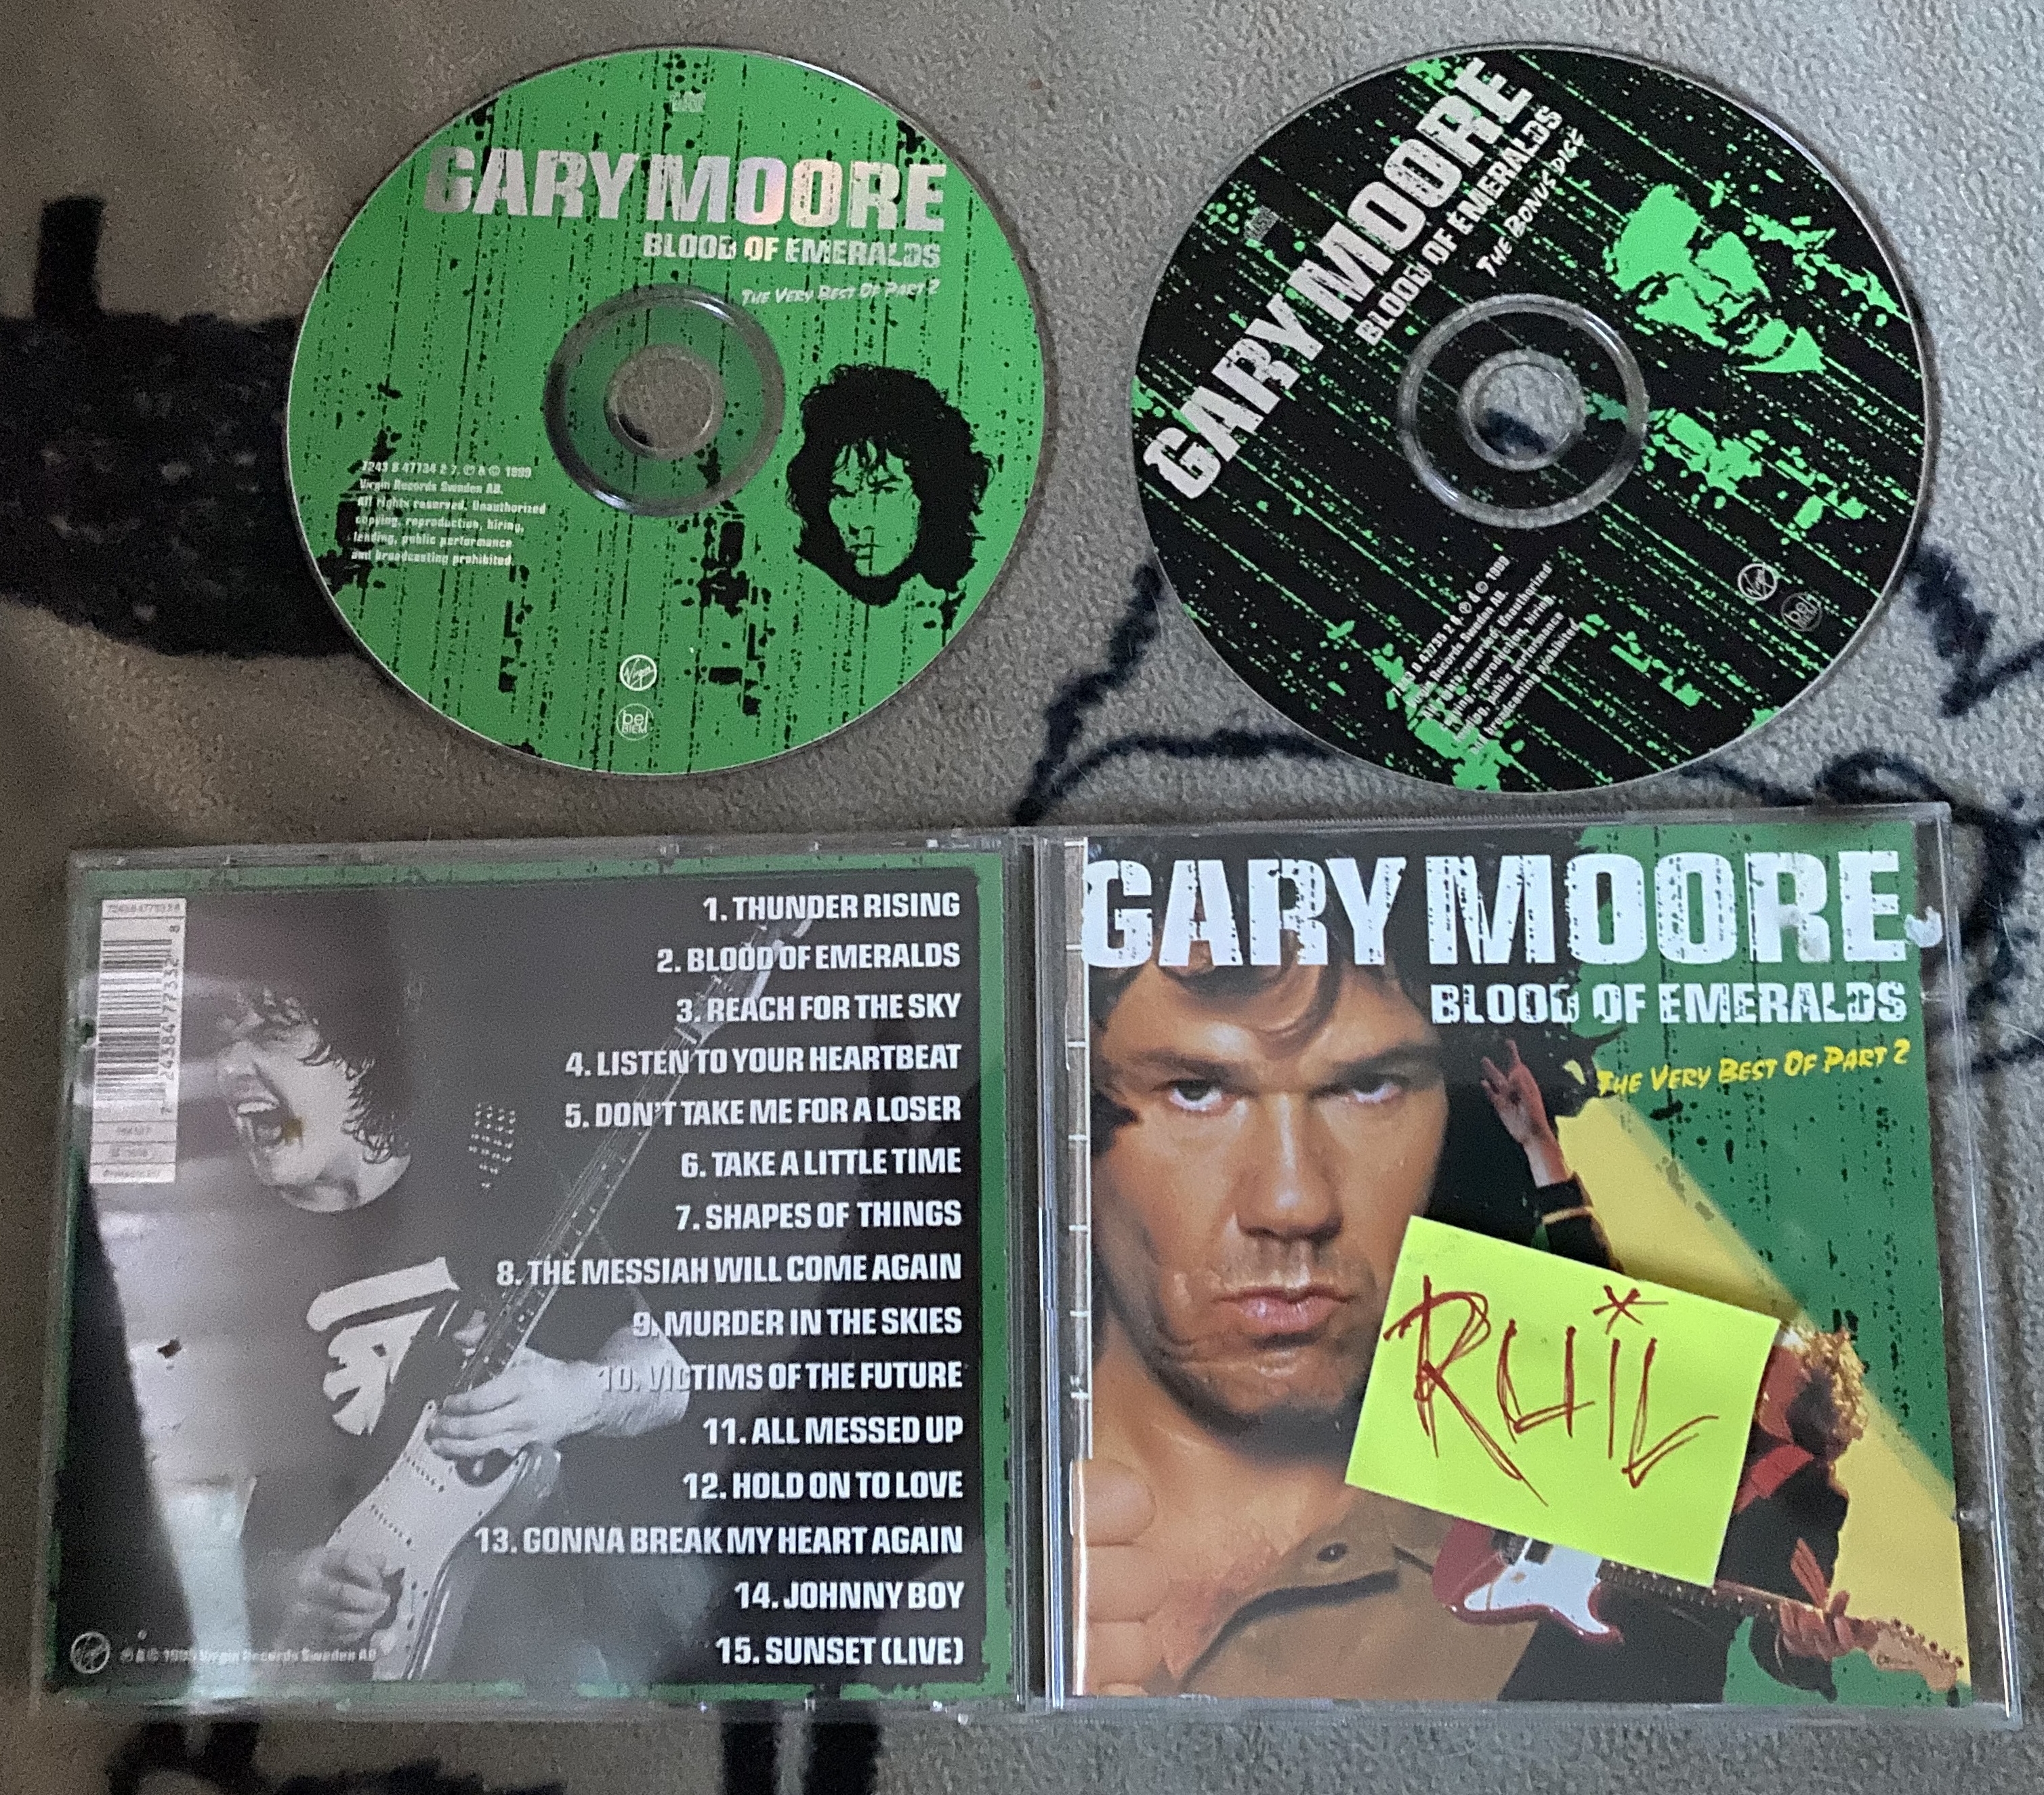 Gary Moore-Blood Of Emeralds The Very Best Of Part 2-(7243 8 47733 2 8)-Limited Edition-2CD-FLAC-1999-RUiL